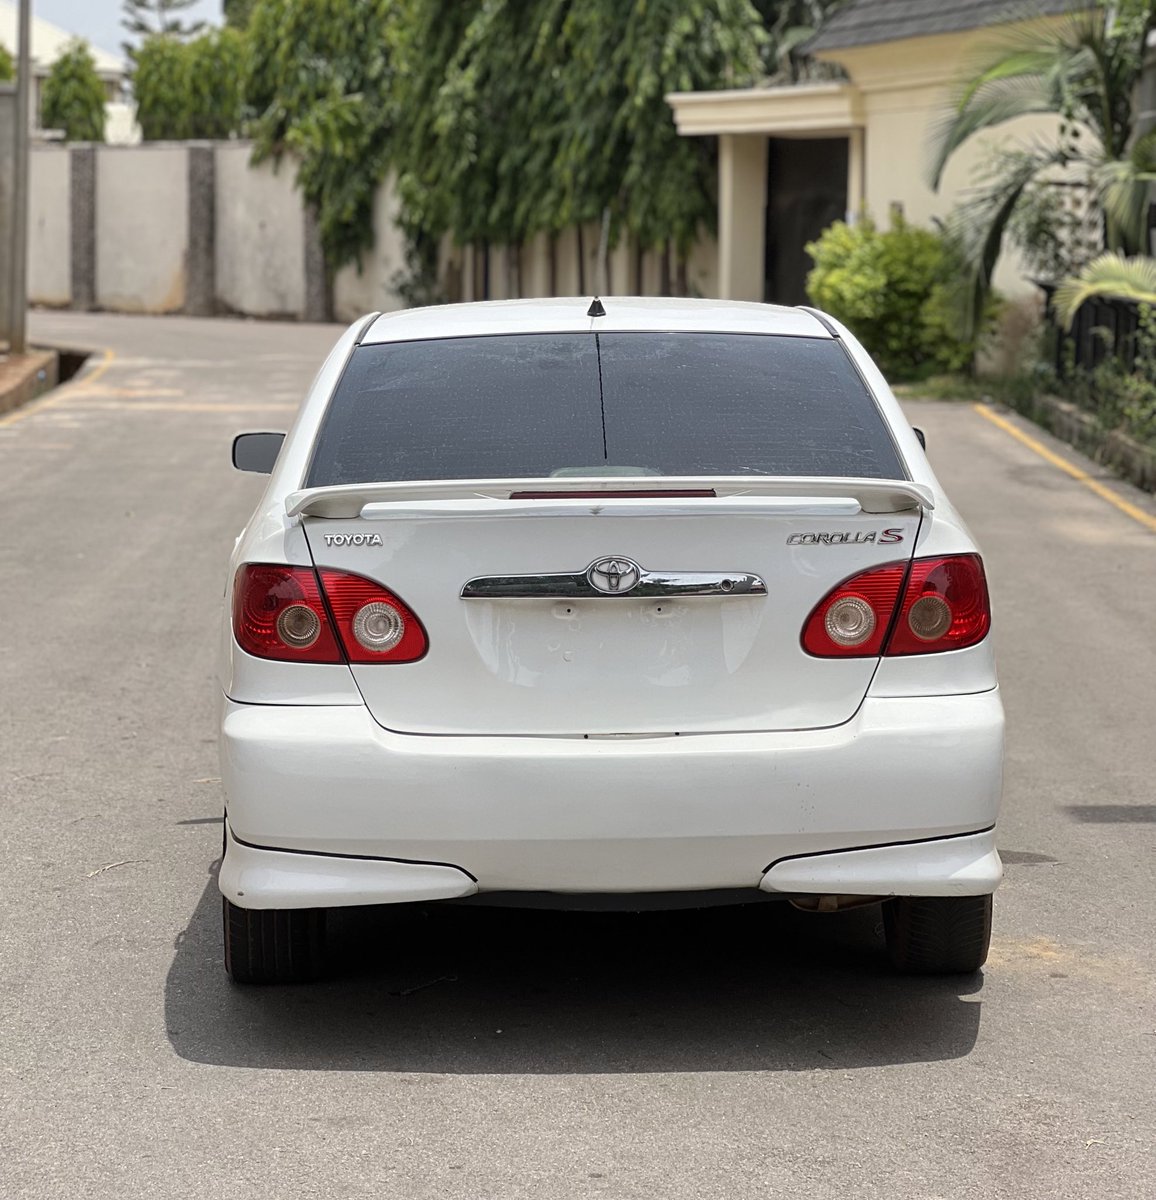 For sale Clean used Toyota Corolla sport 2005 model with genuine papers selling for just 4.250m last Kaduna Call//dm//whatsapp: 09076871515